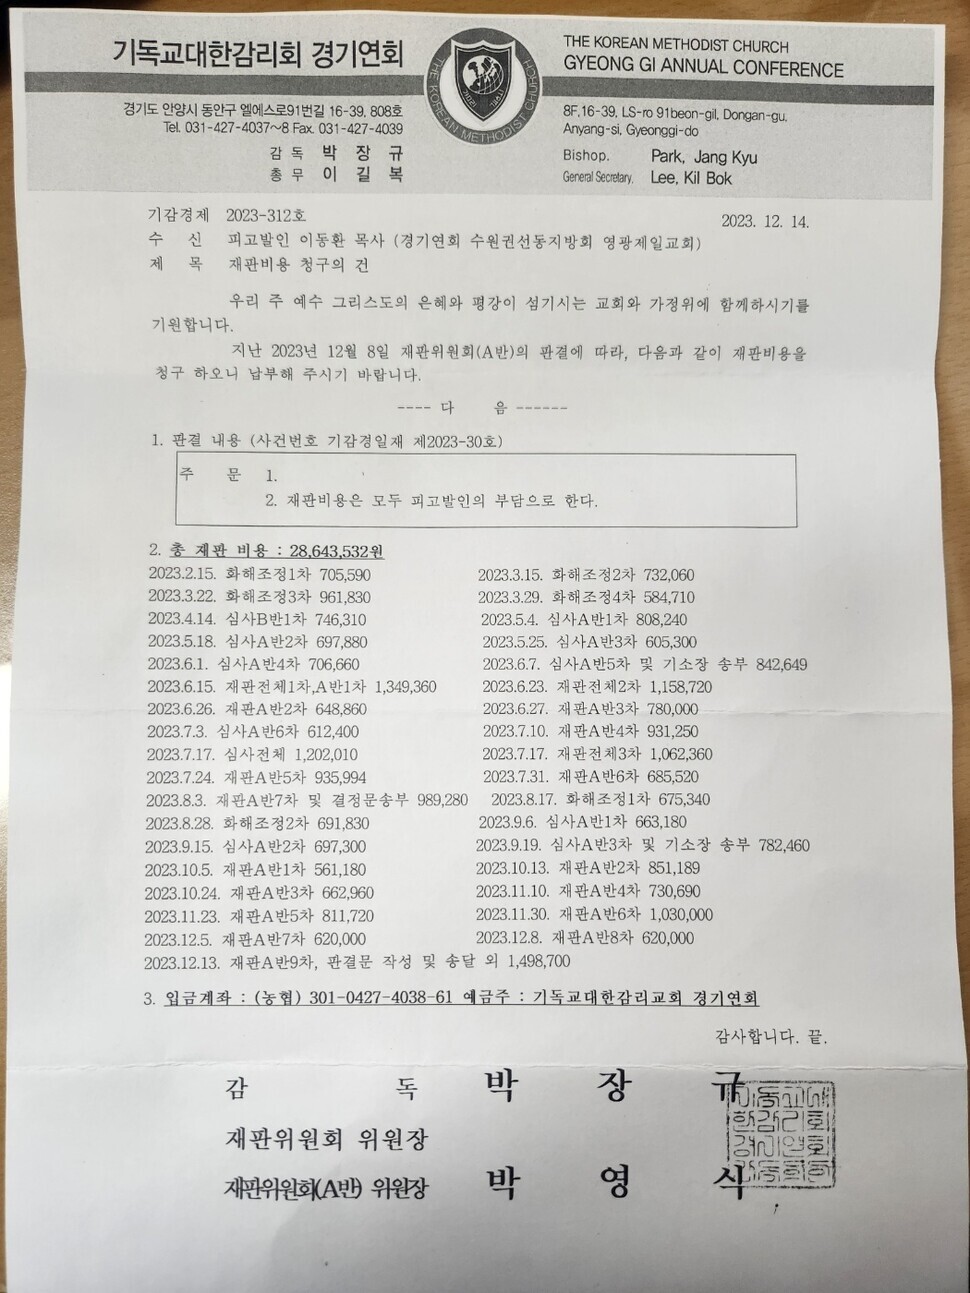 The court fees request that Rev. Lee Dong-hwan received from the Korean Methodist Church’s Gyeonggi Annual Conference on Dec. 18. (from Lee’s Facebook page)